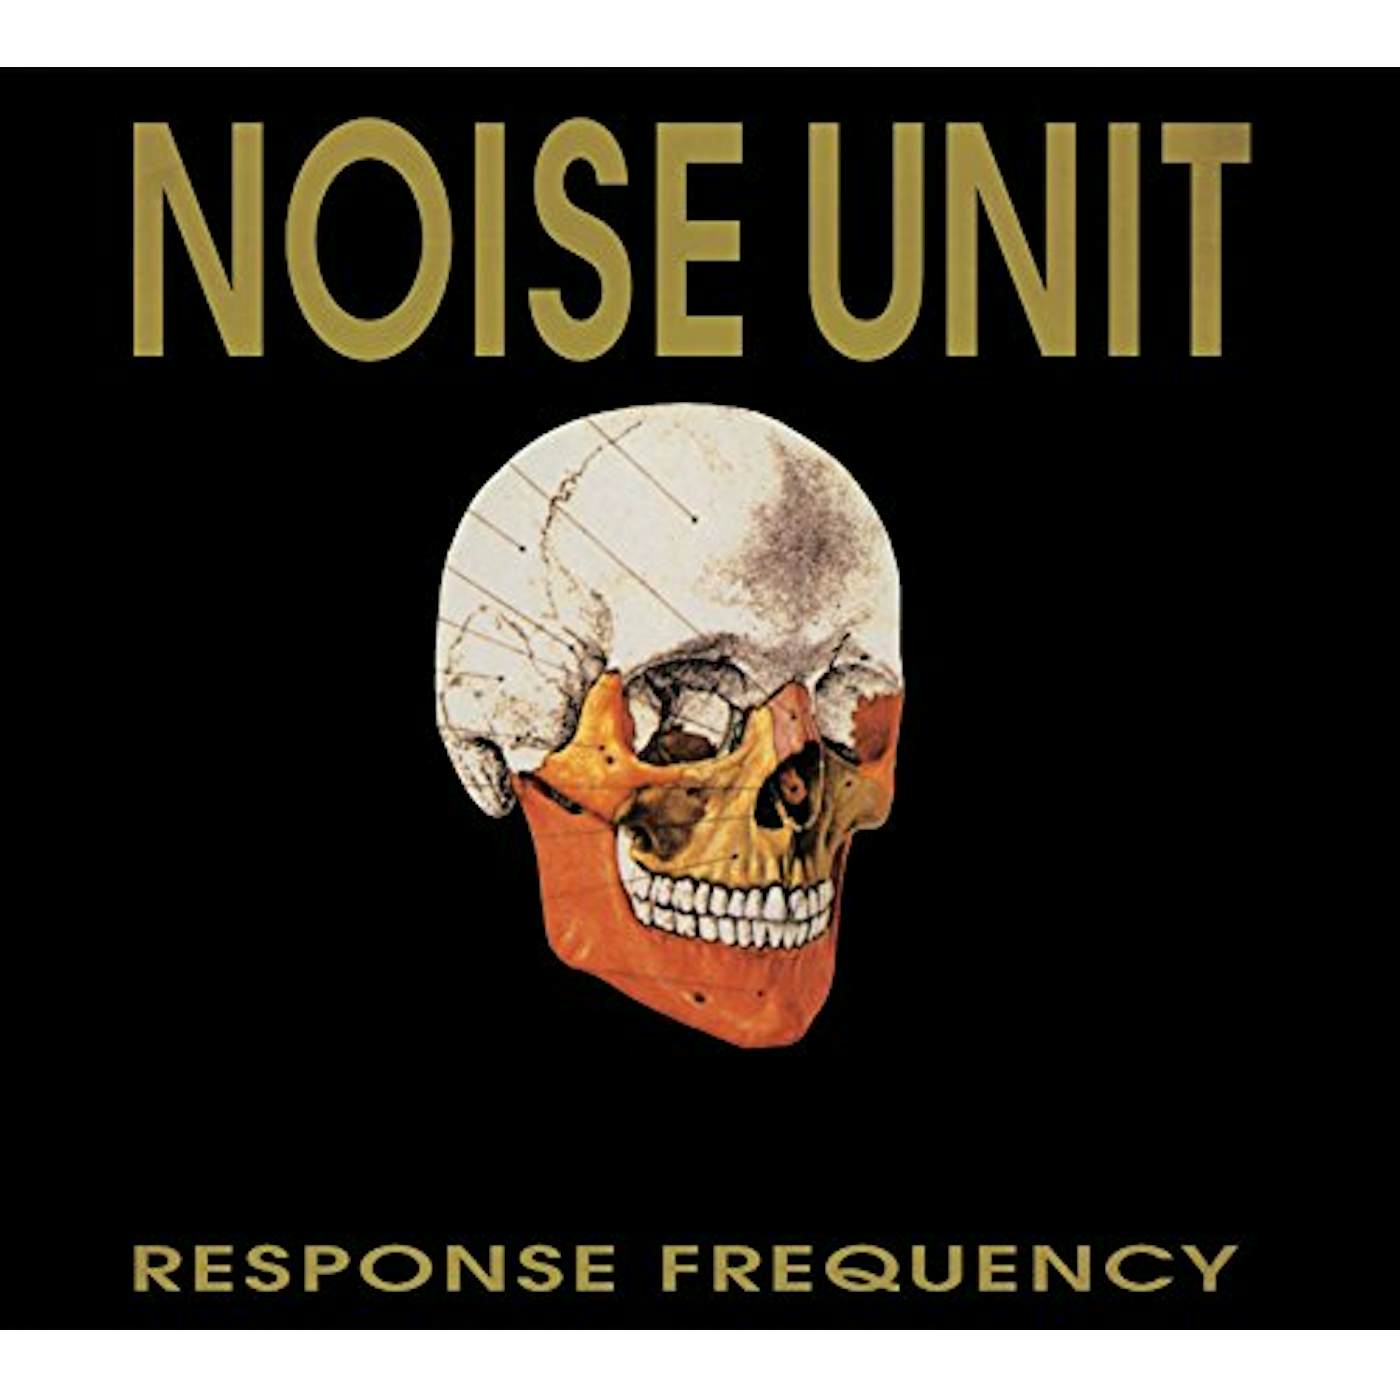 Noise Unit RESPONSE FREQUENCY CD